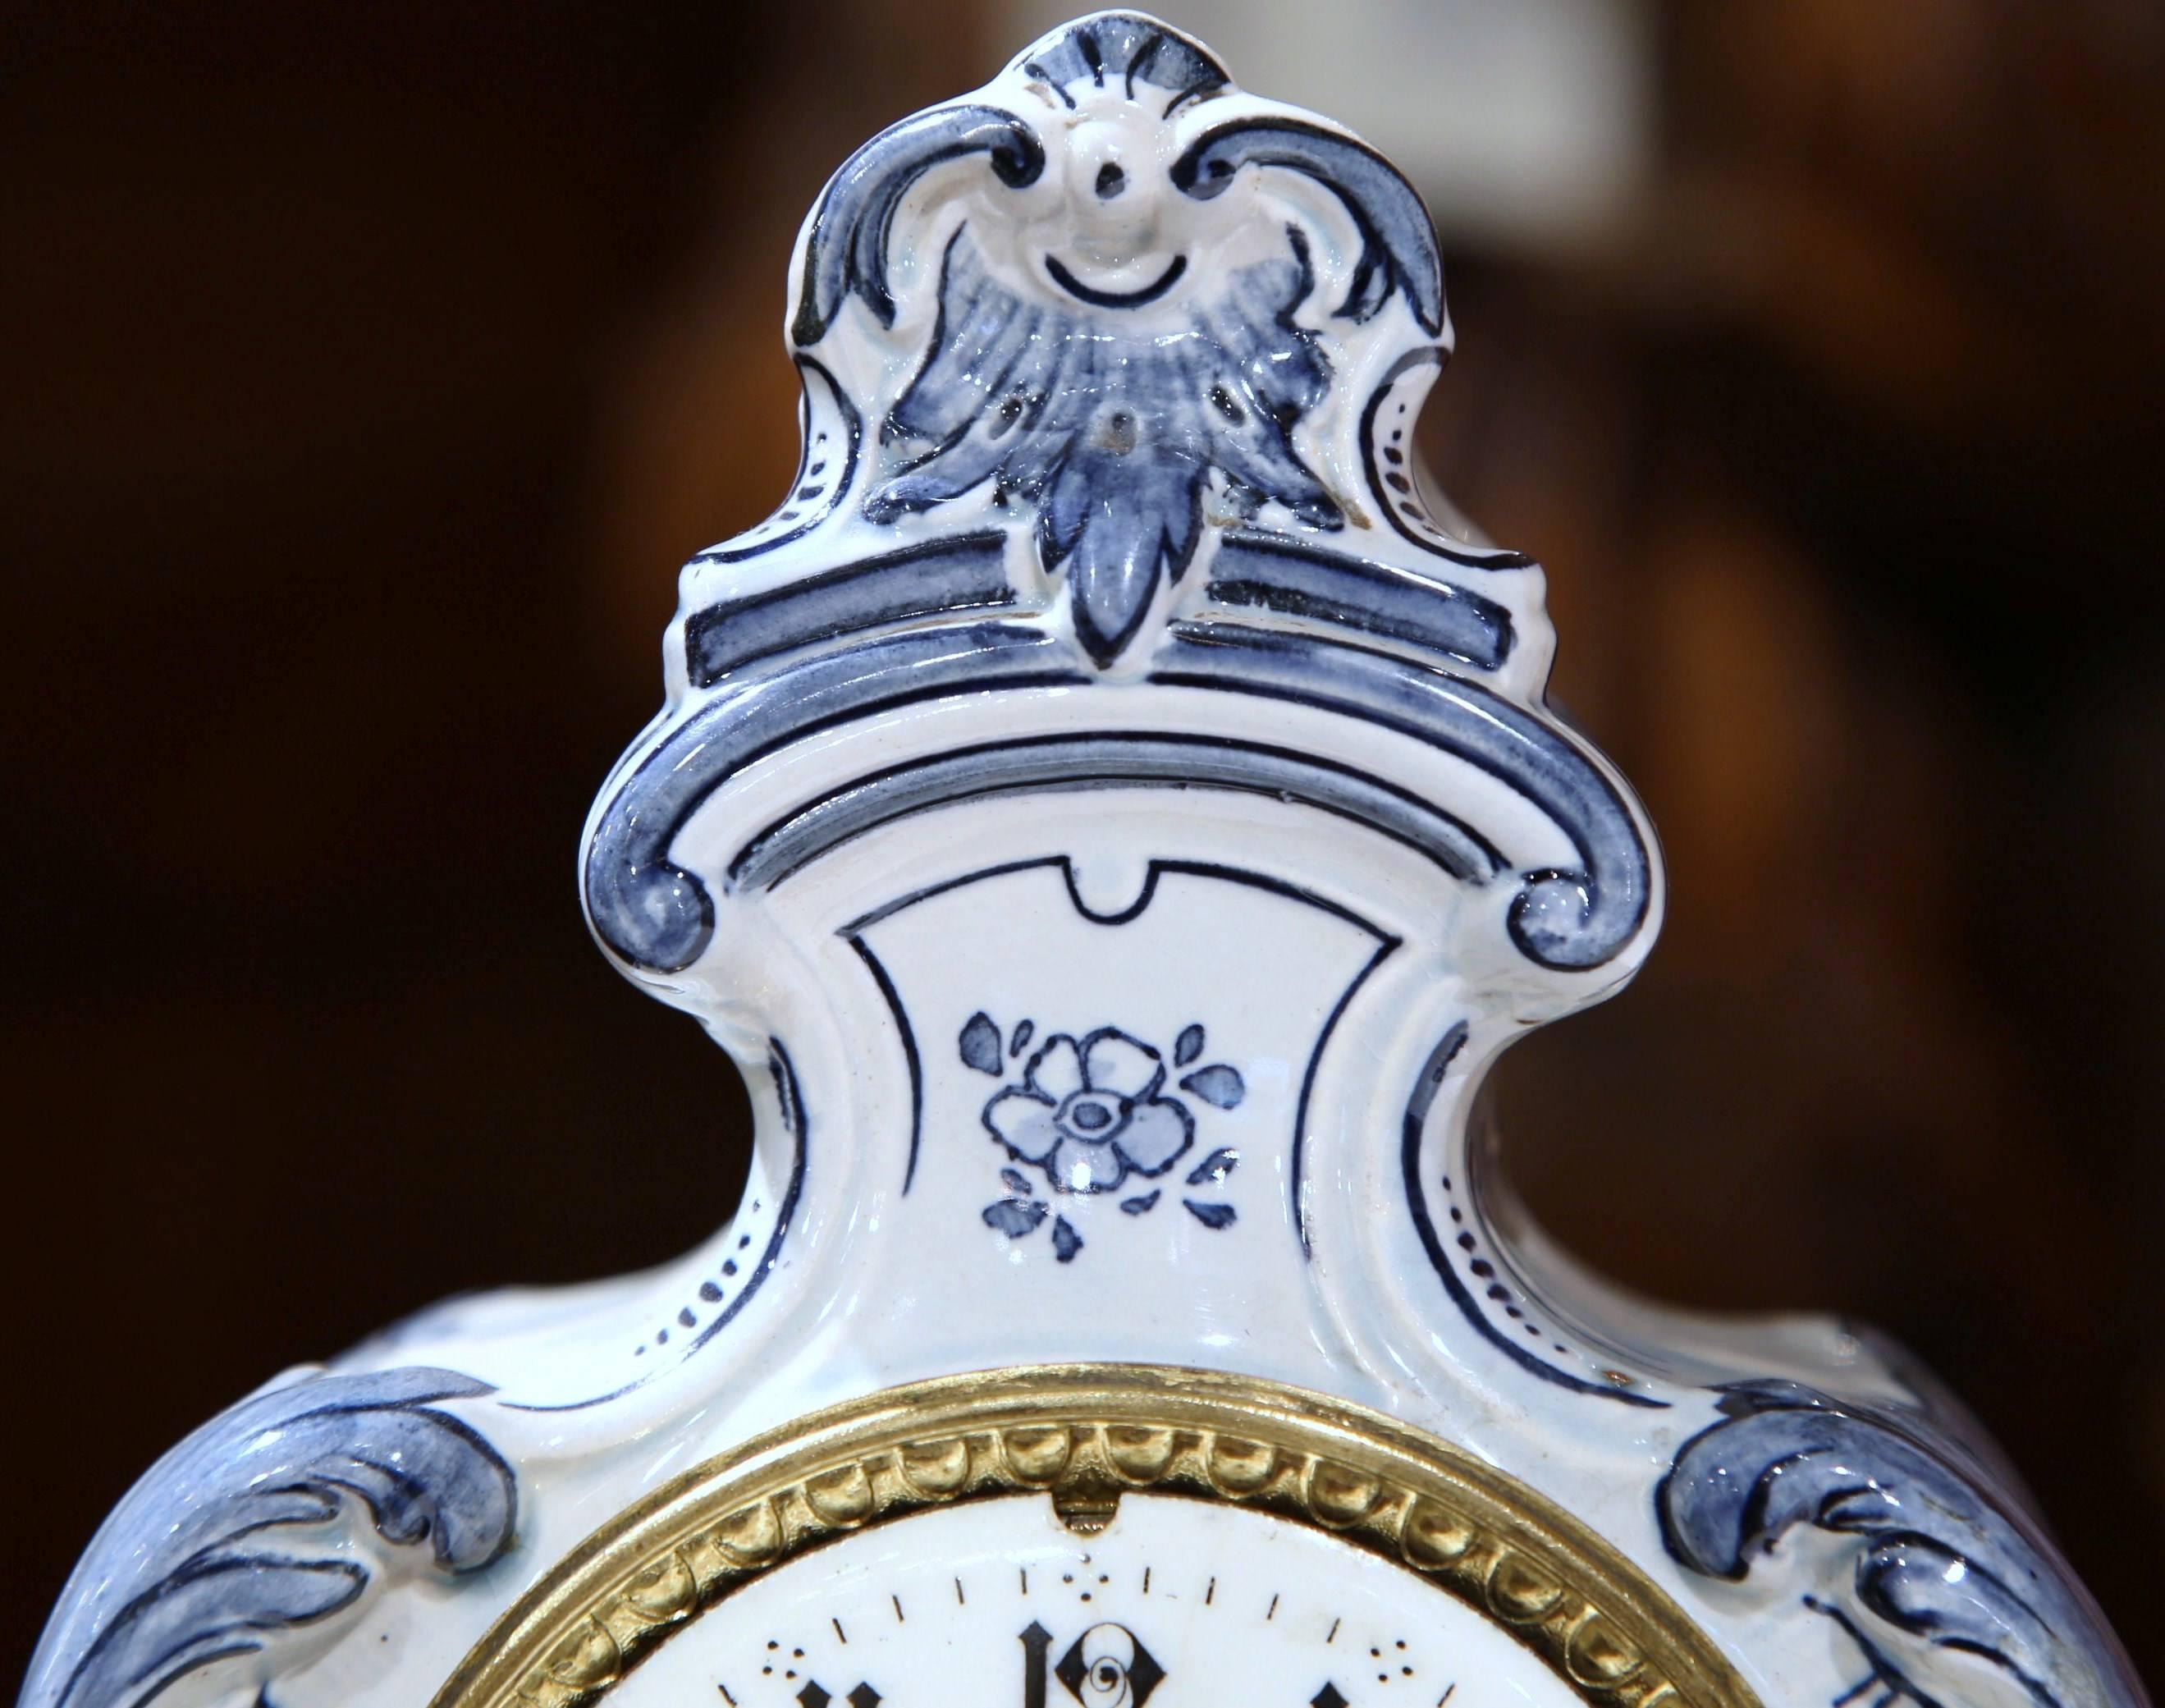 Hand-Crafted 19th Century French Blue and White Hand-Painted Desk or Mantel Delft Clock